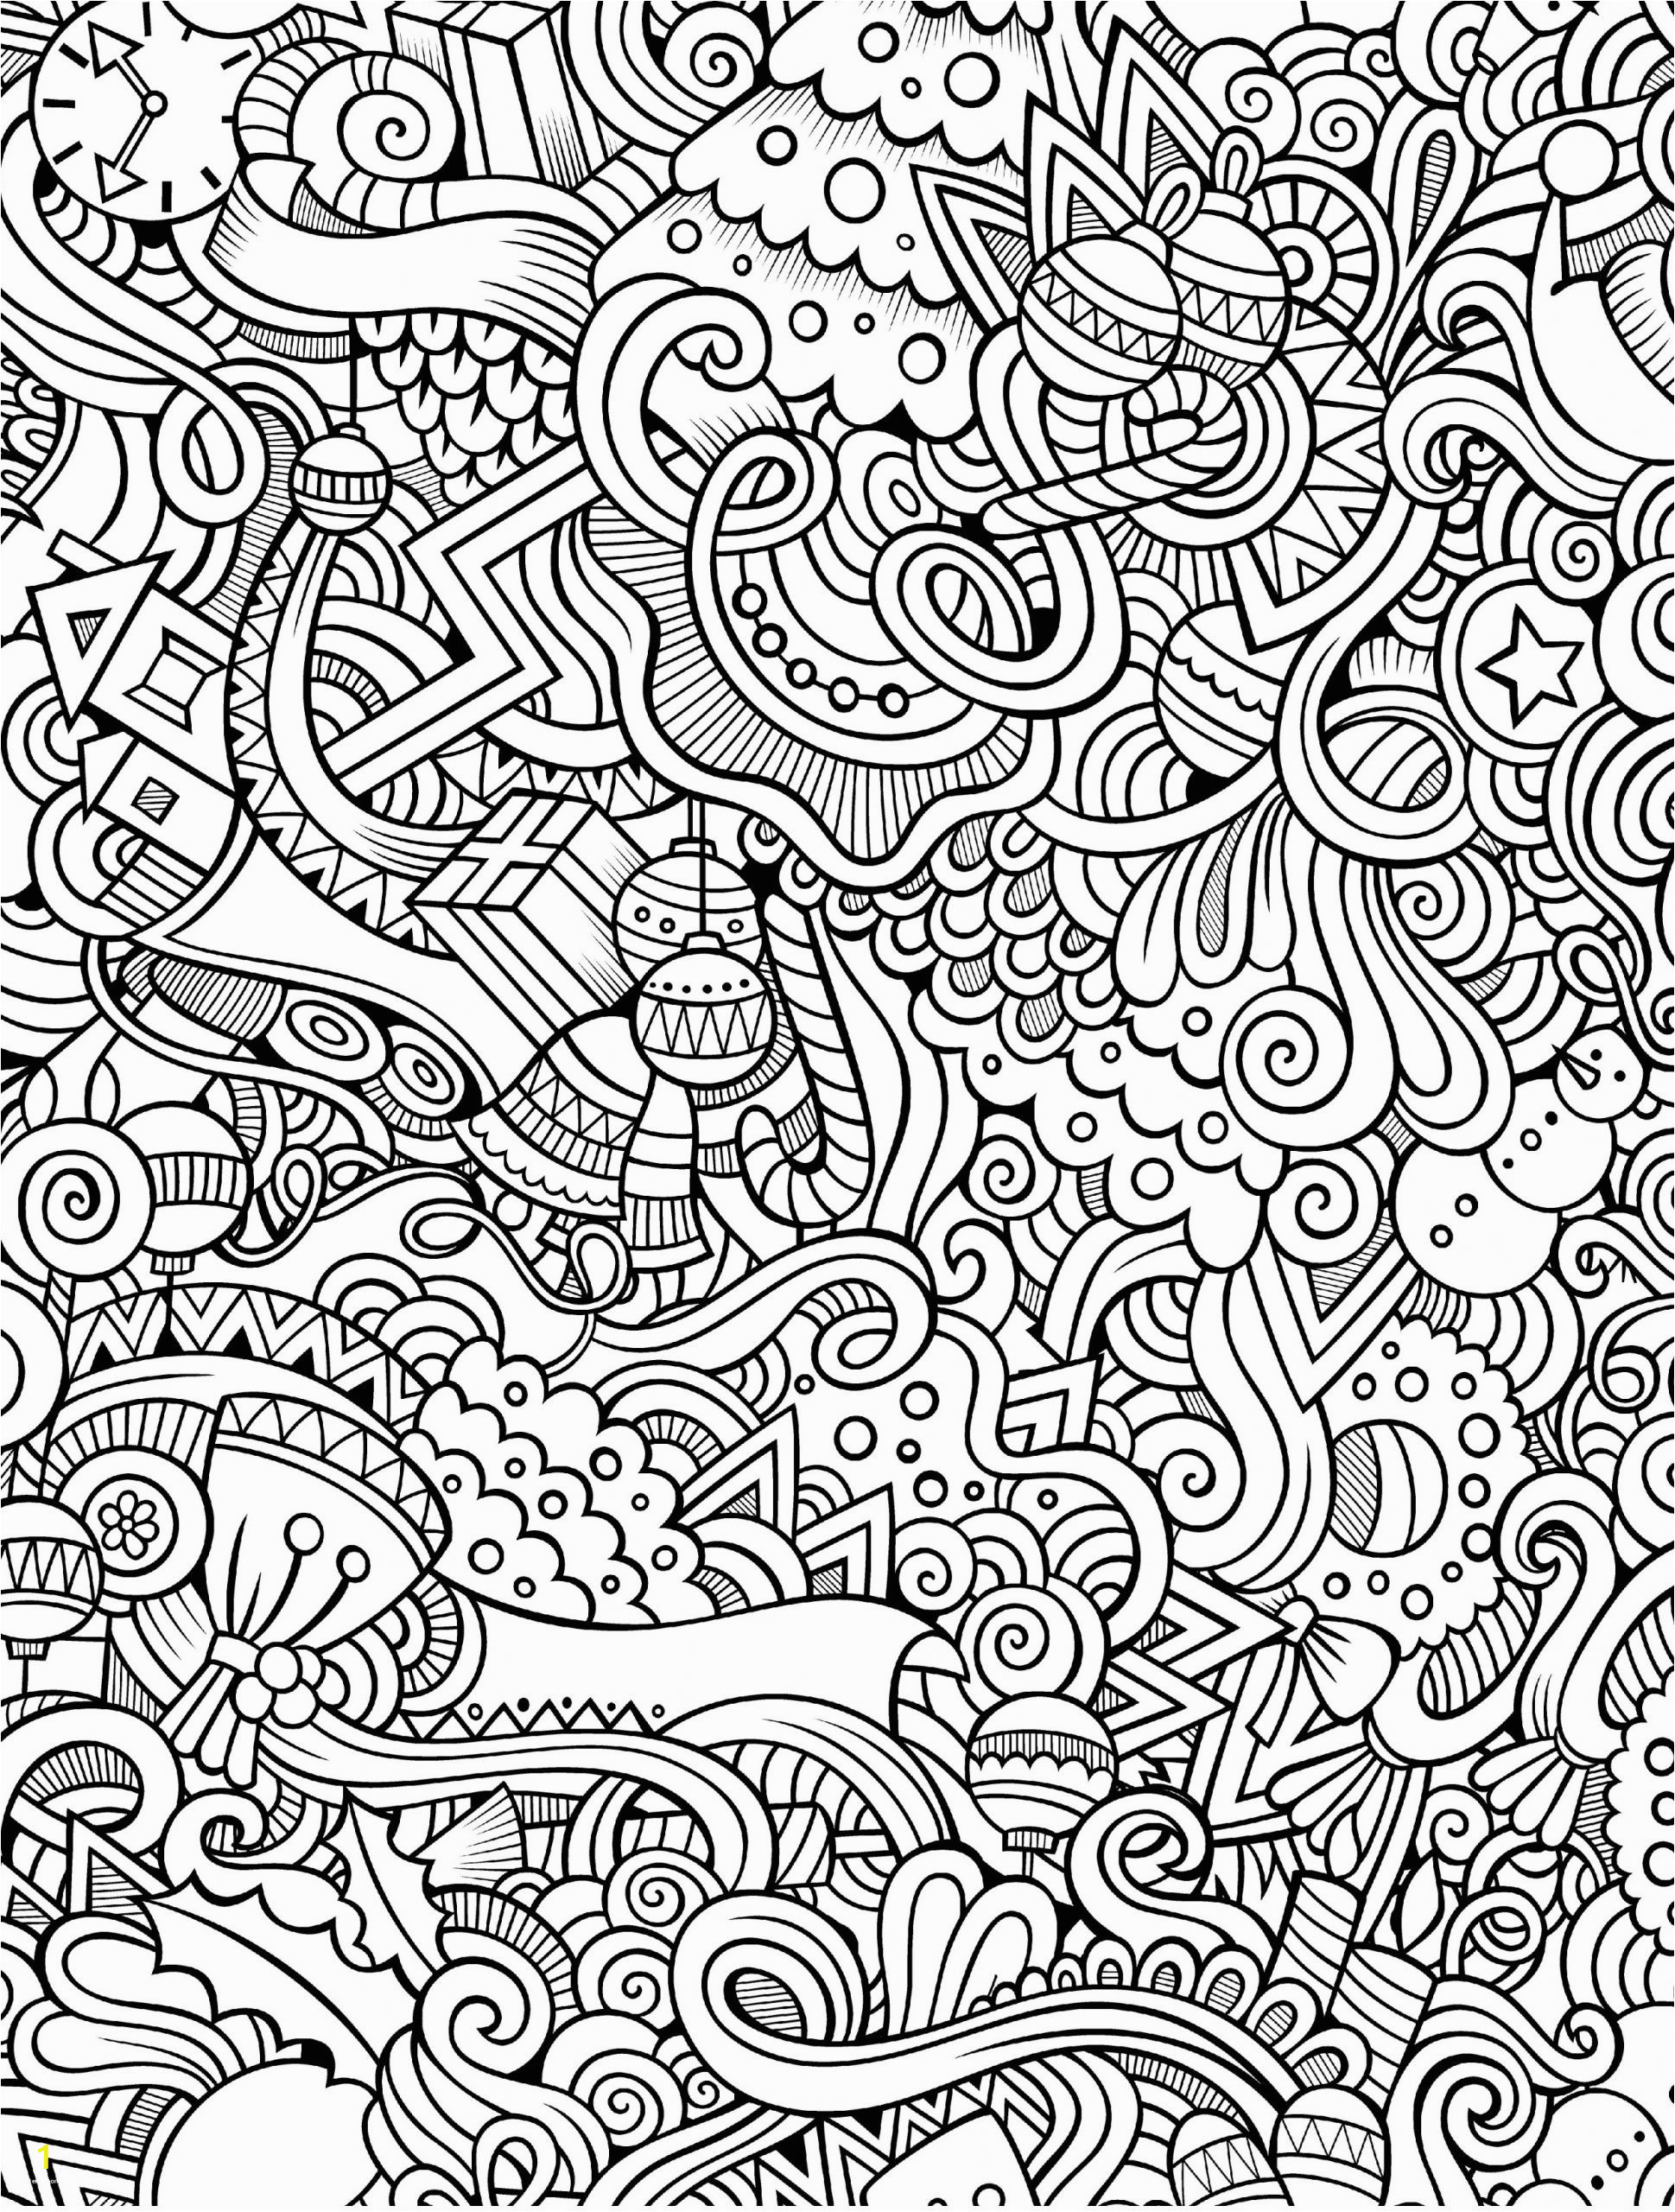 Coloring Pages for High School Students Pdf Coloring Pages Coloring Books for Adults Pdf Free Download